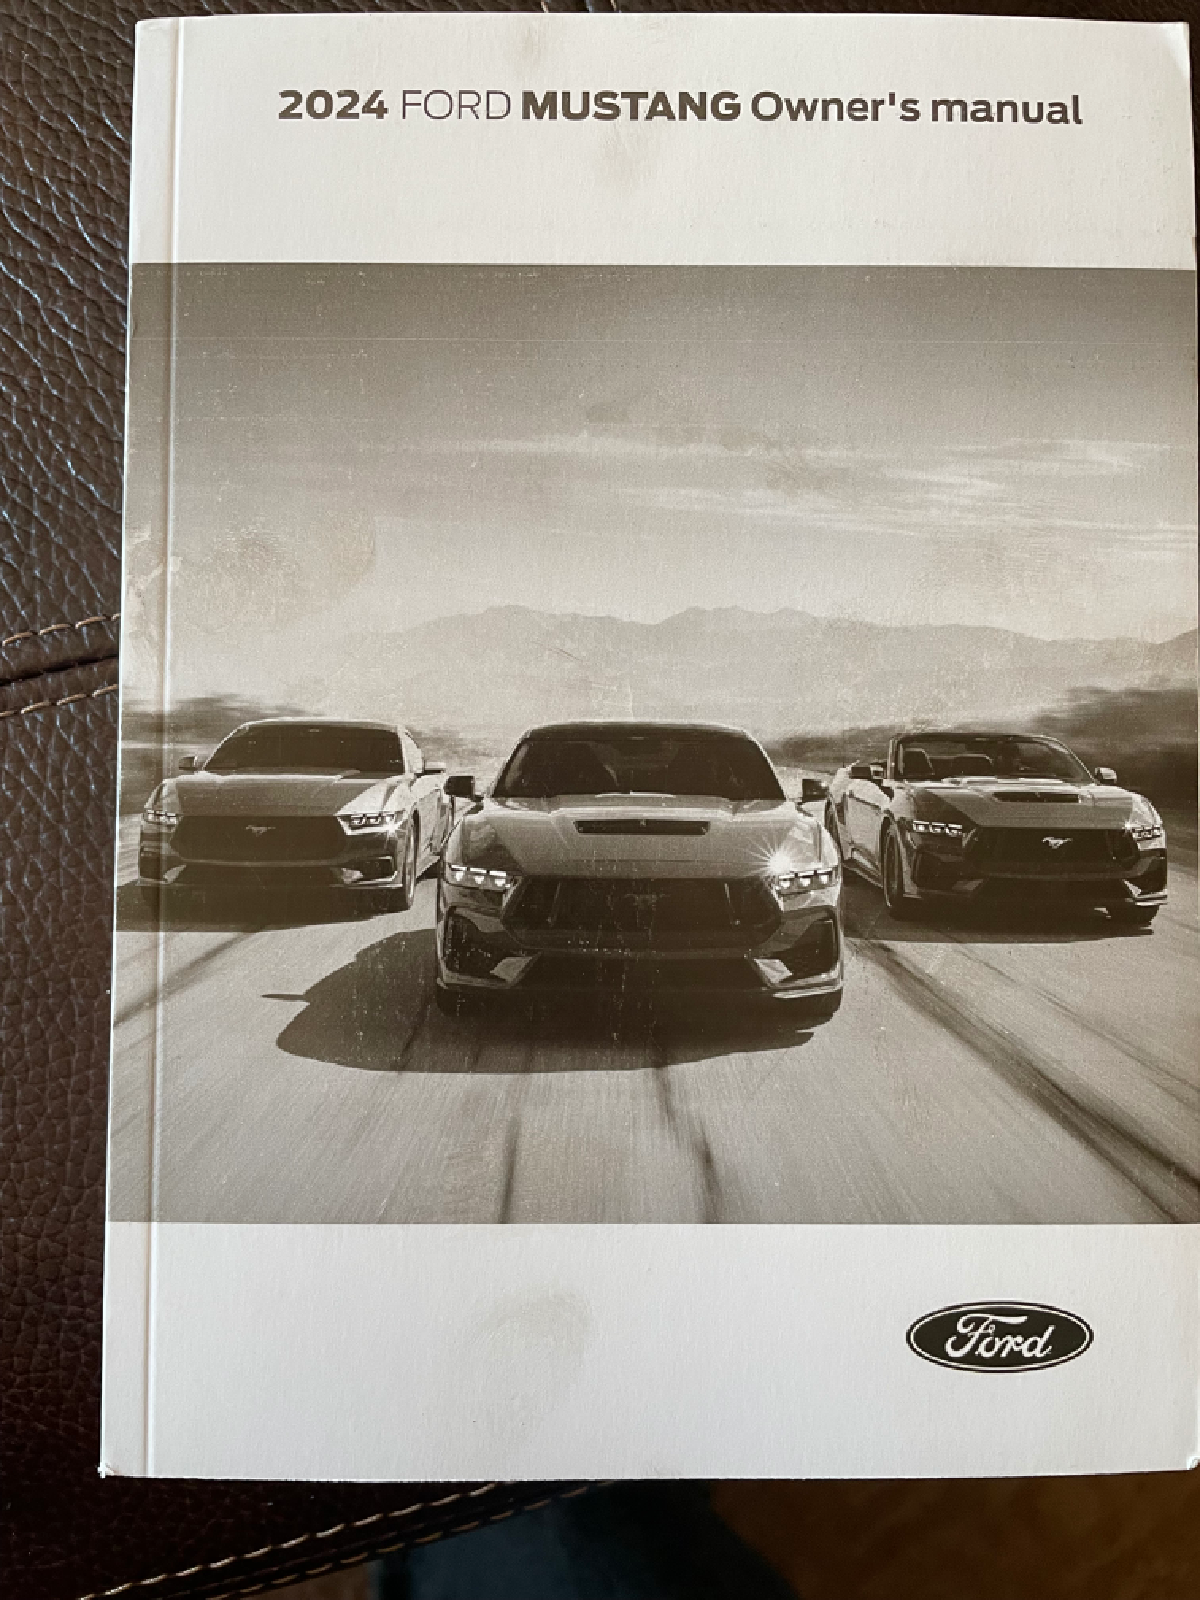 S650 Mustang Owners manual arrived! IMG_5252